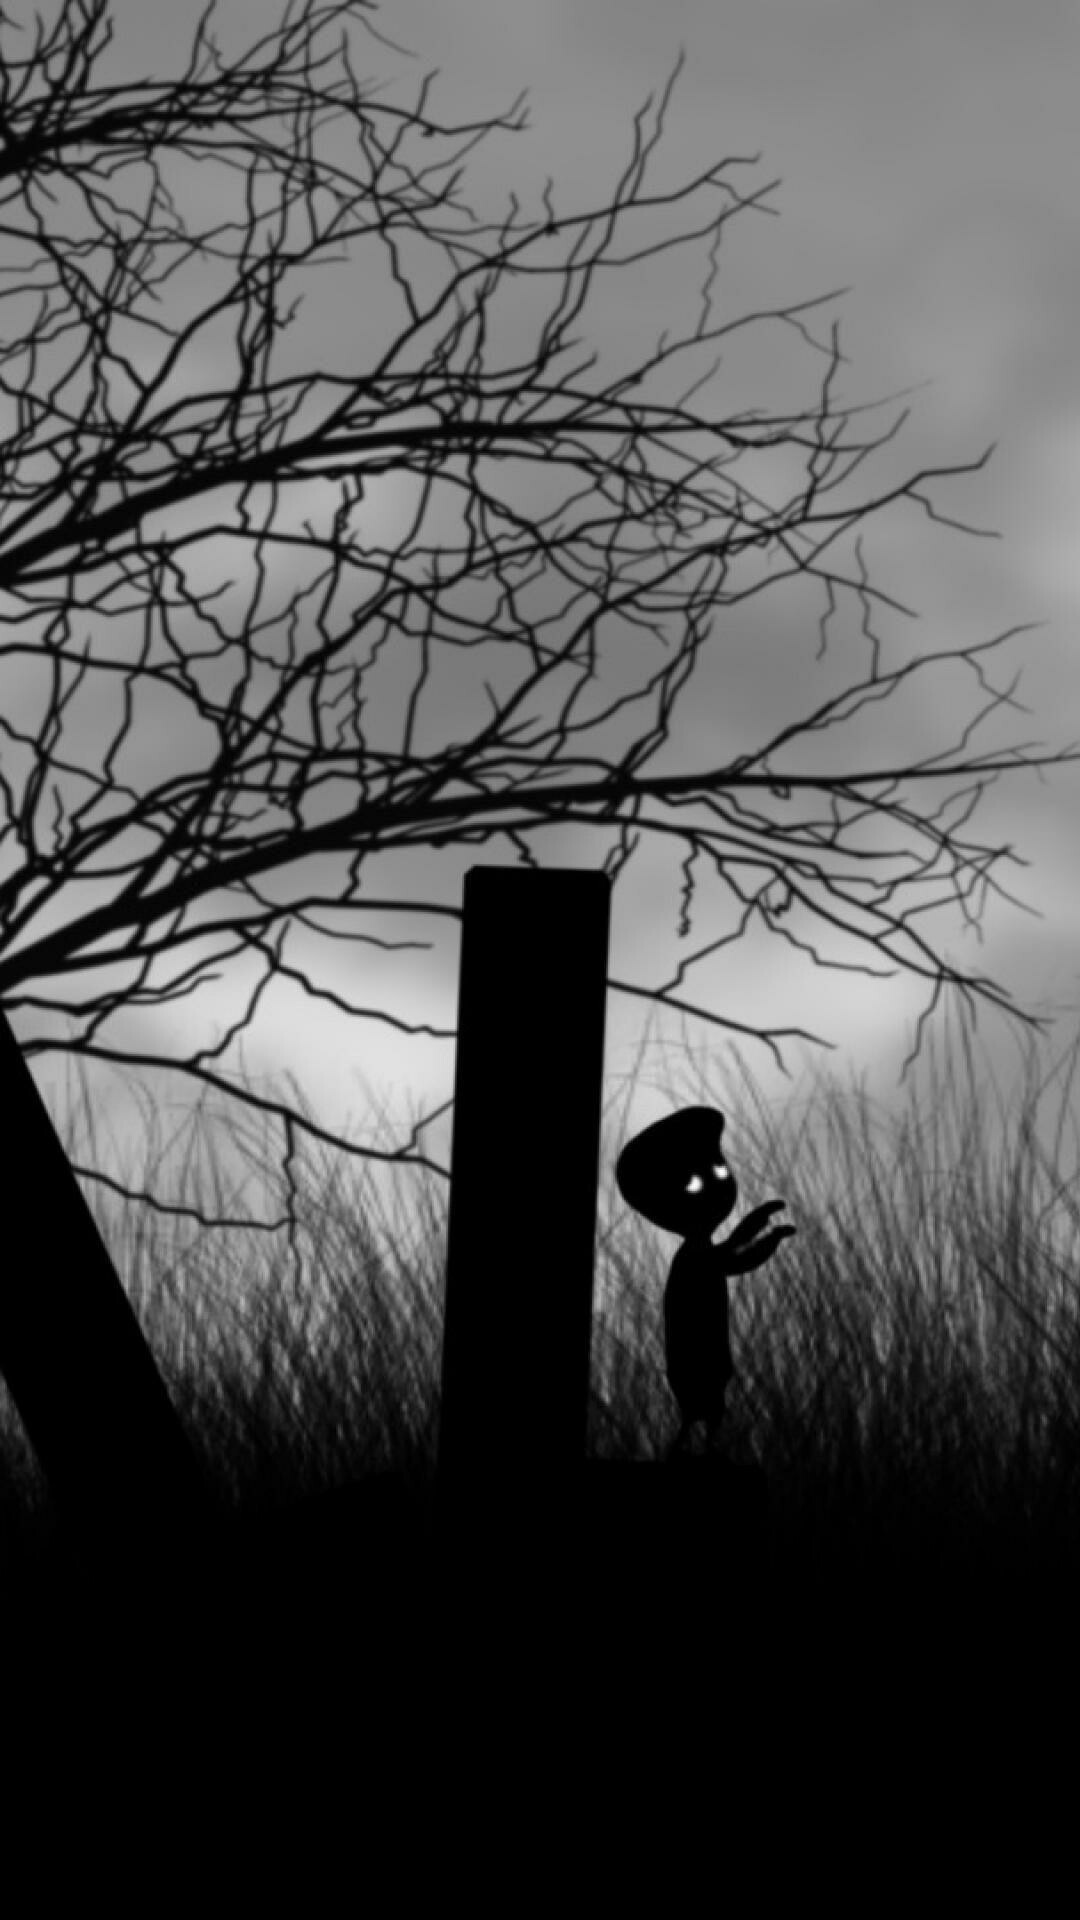 Limbo: The team developed the game's puzzles by first assuming the player was "their own worst enemy", and made puzzles as devious as possible, but then scaled back their difficulty or added visual and audible aids as if the player was a friend. 1080x1920 Full HD Wallpaper.